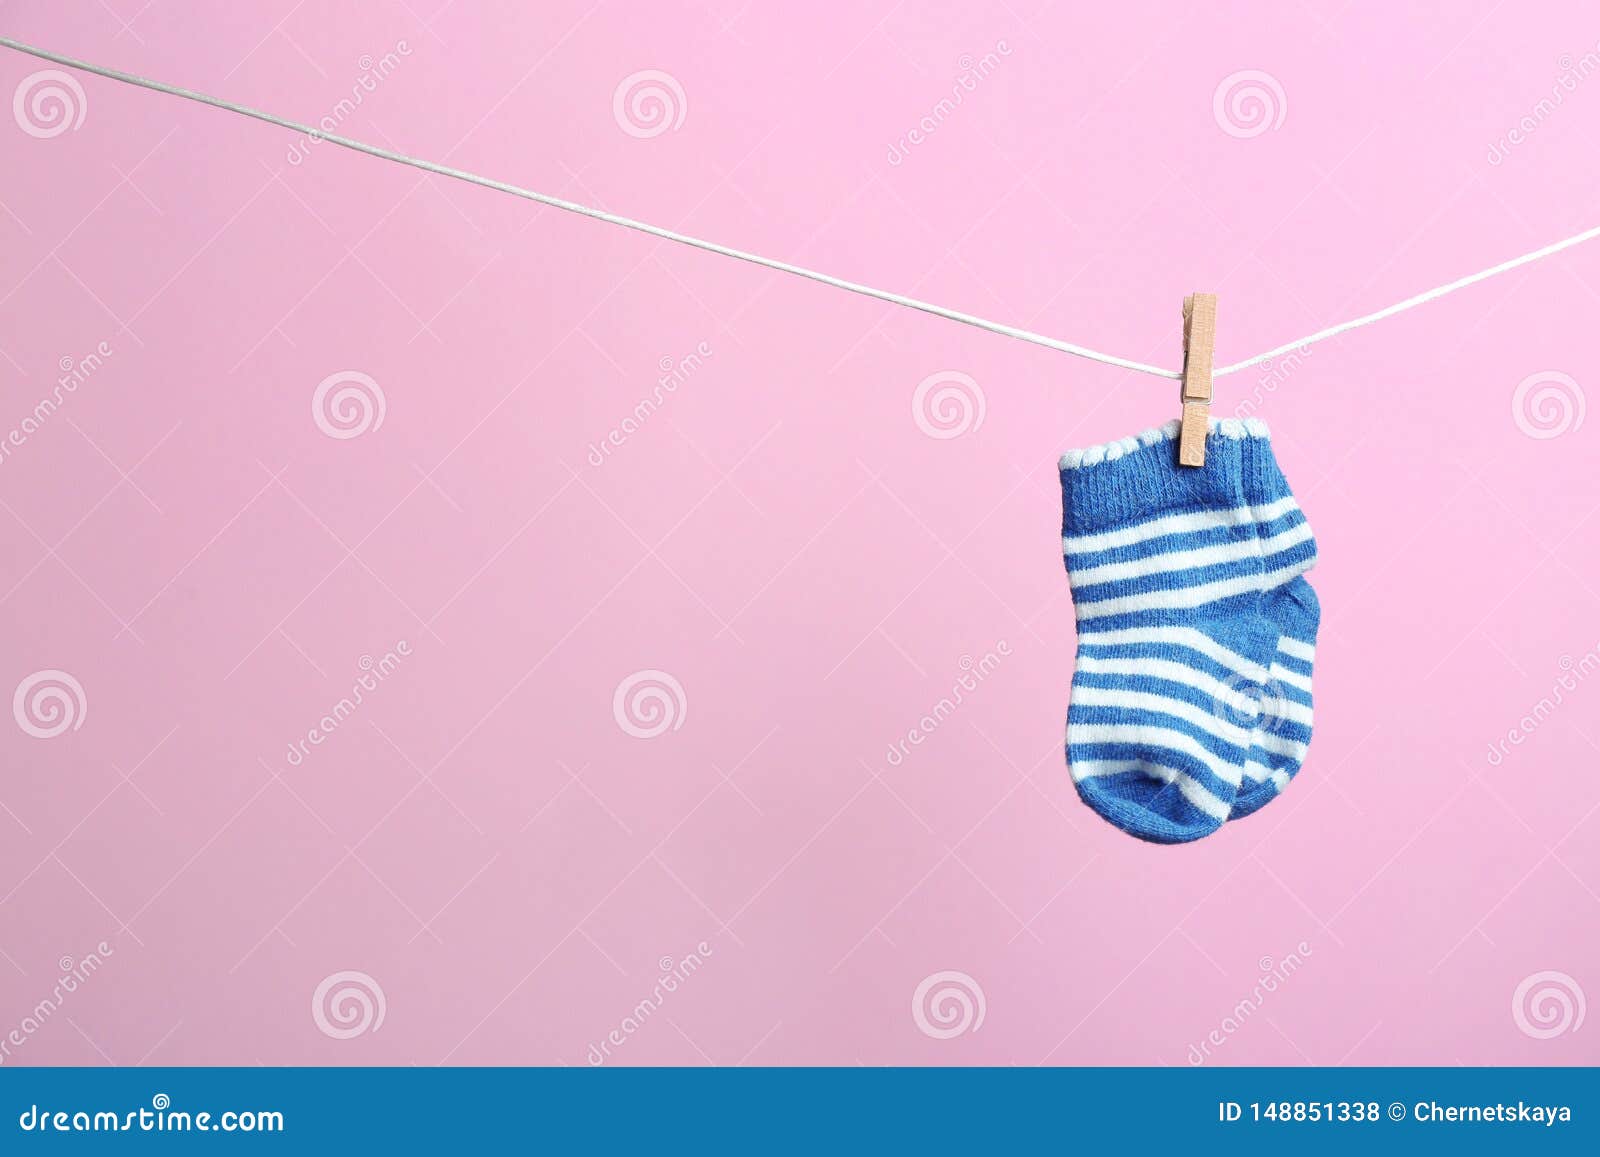 Small Socks Hanging on Washing Line, Space for Text. Baby Accessories ...